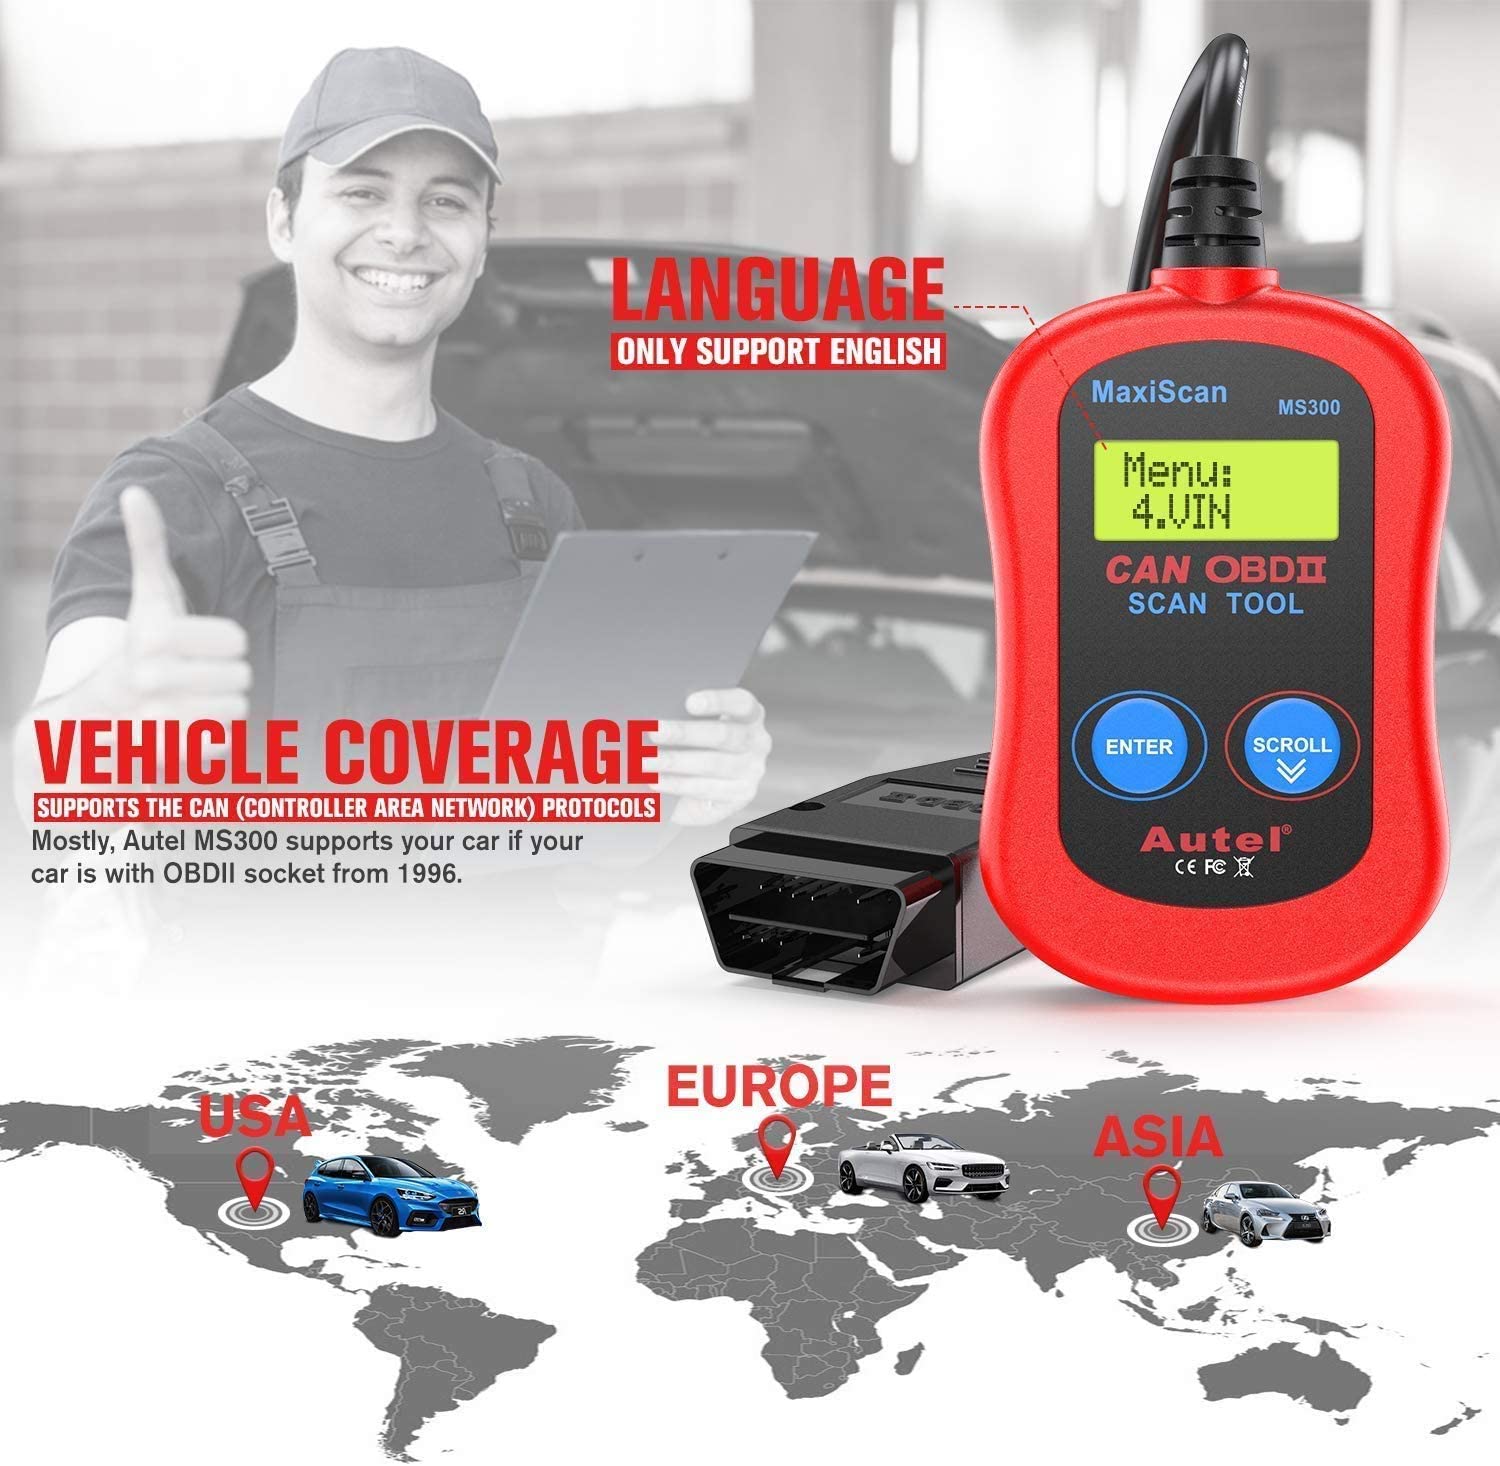 Autel MS300 Universal OBD2 Scanner Car Code Reader Read & Erase Fault Codes Check Emission Monitor Status CAN Vehicles Diagnostic Scan Tool Turn Off Check Engine Light 